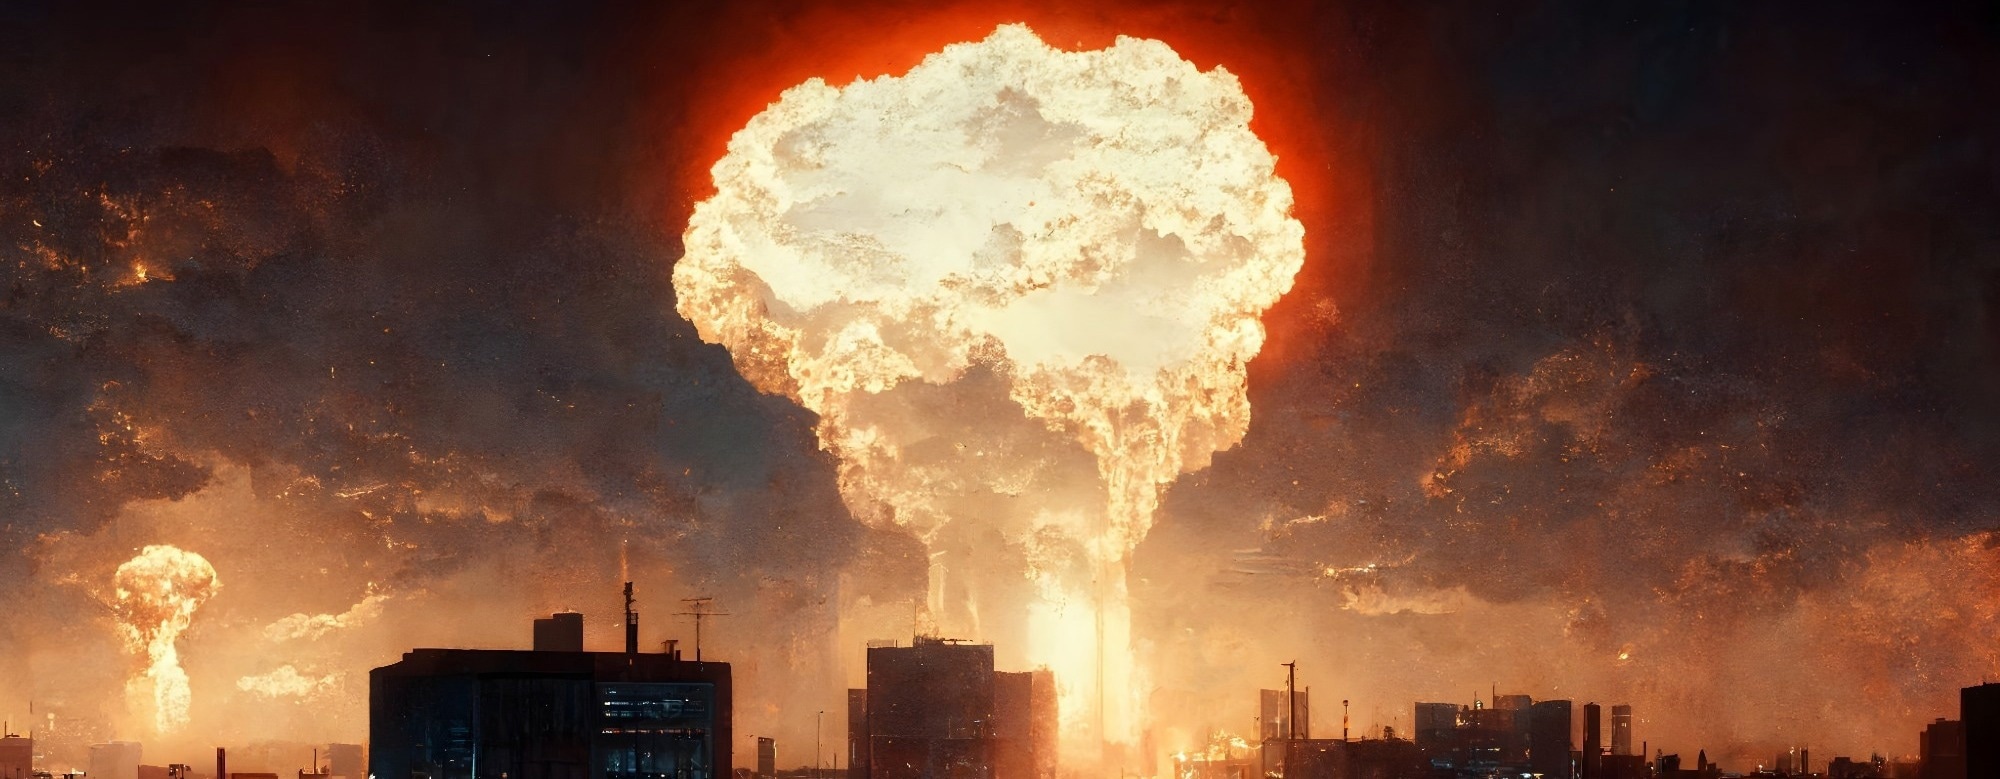 Nuclear Explosions and their Impact on the Environment